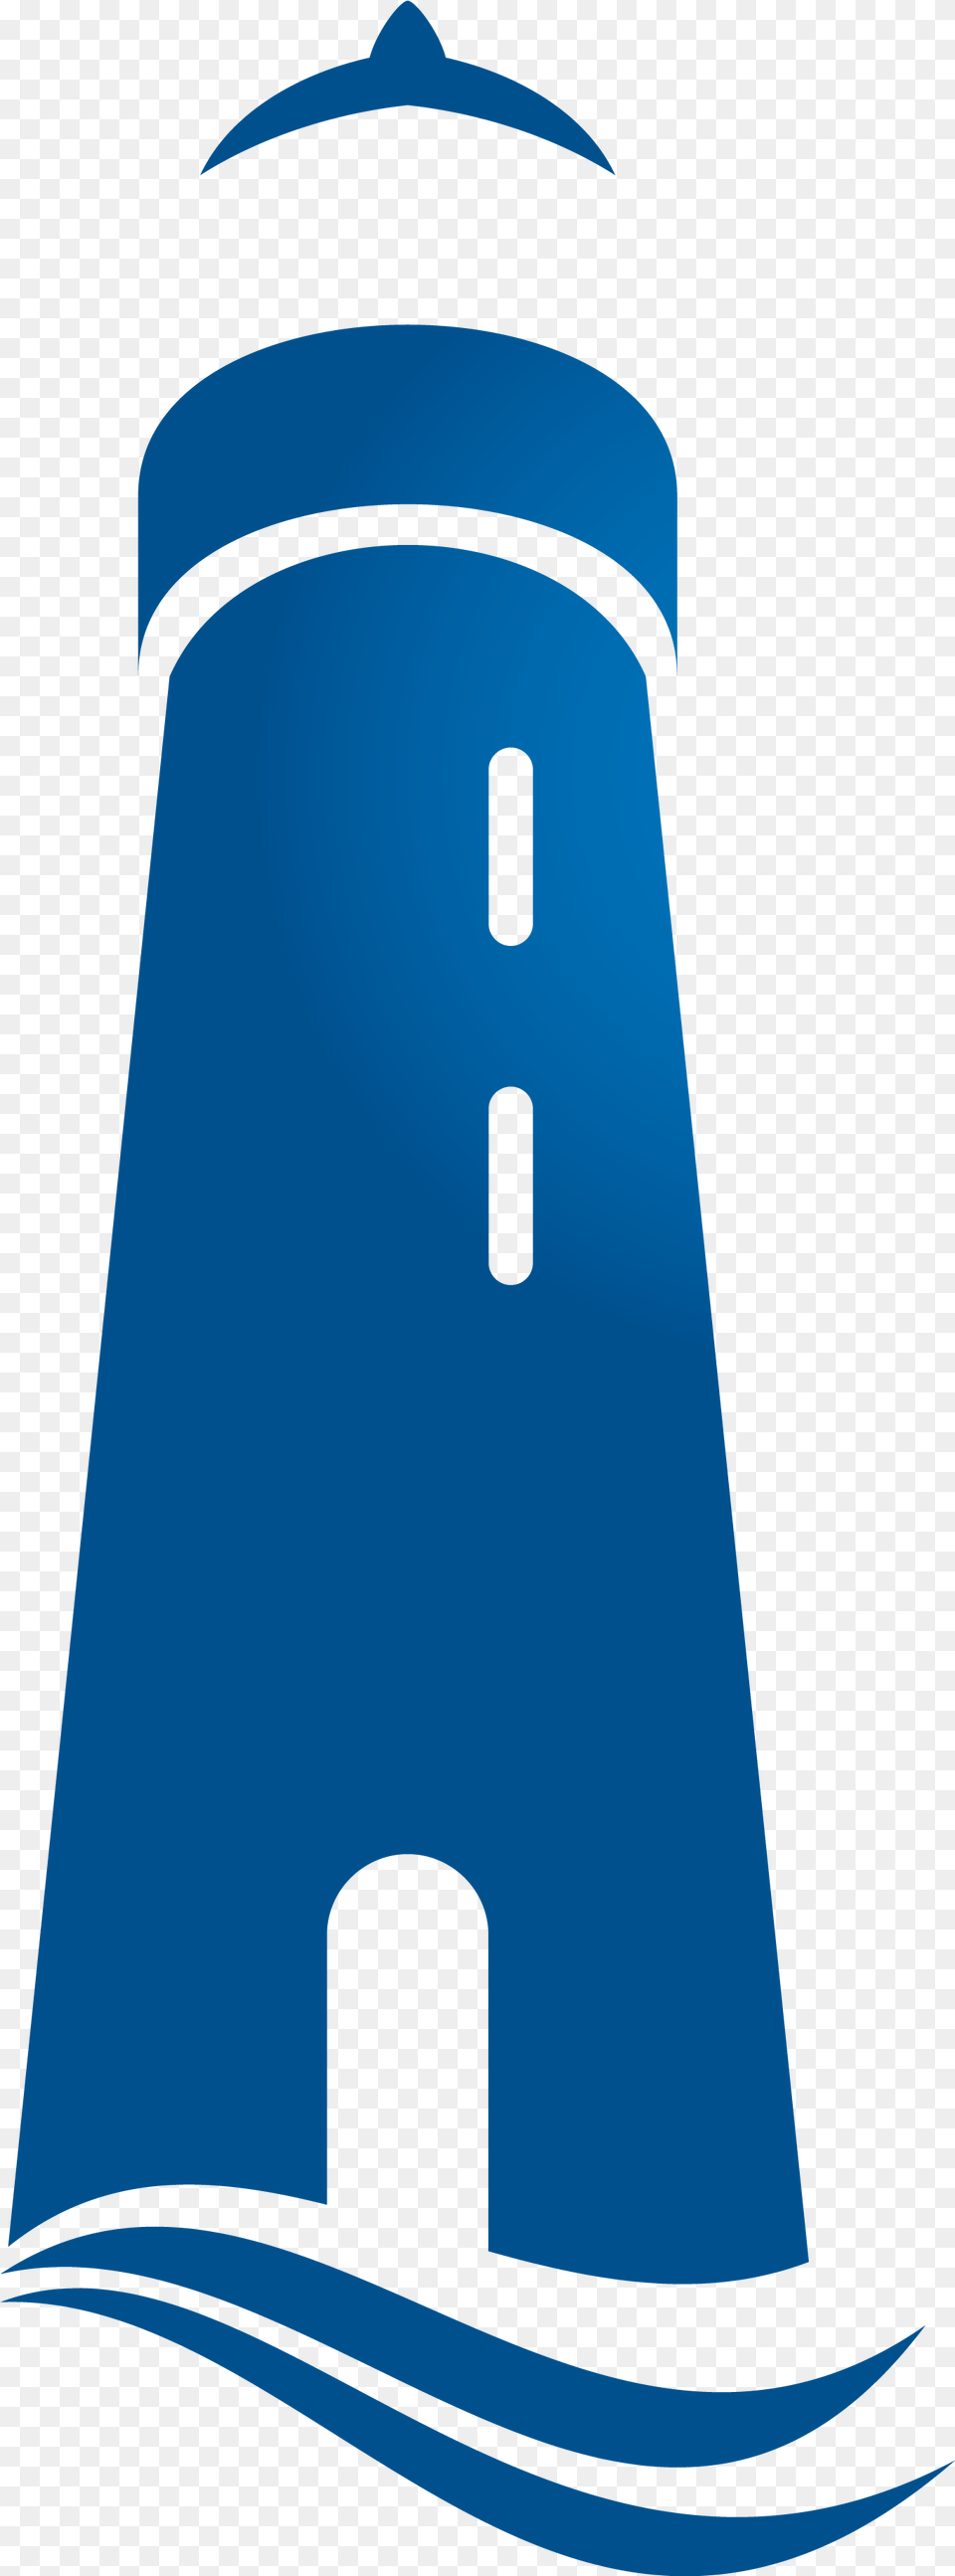 Library Of Light House Vector Blue Light House, Architecture, Building, Tower, Beacon Free Transparent Png